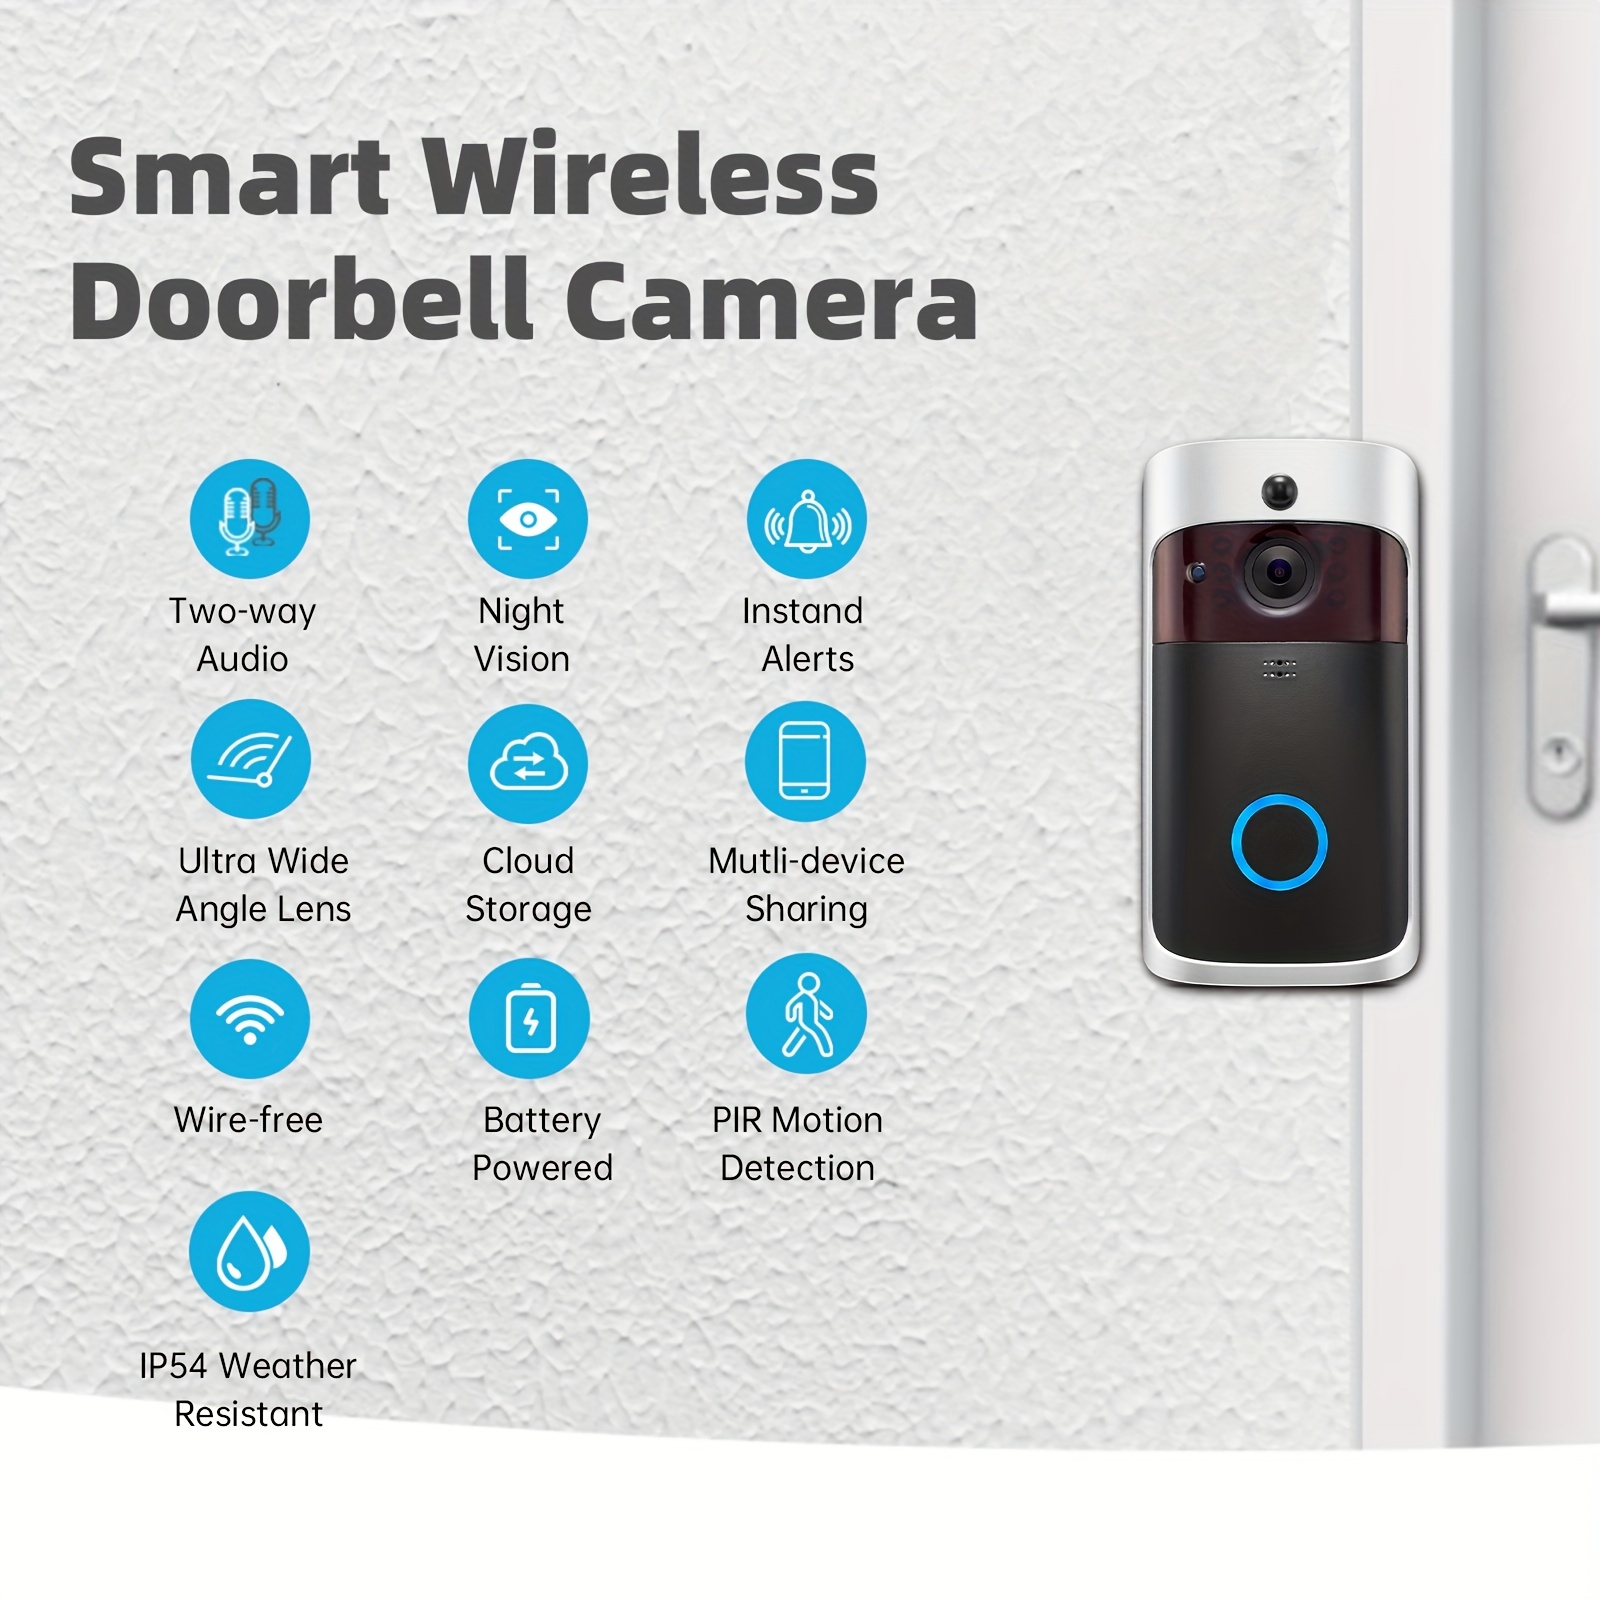 Ring & Video Doorbell WITH Camera Wireless WiFi Security Phone Bell 720PHD  